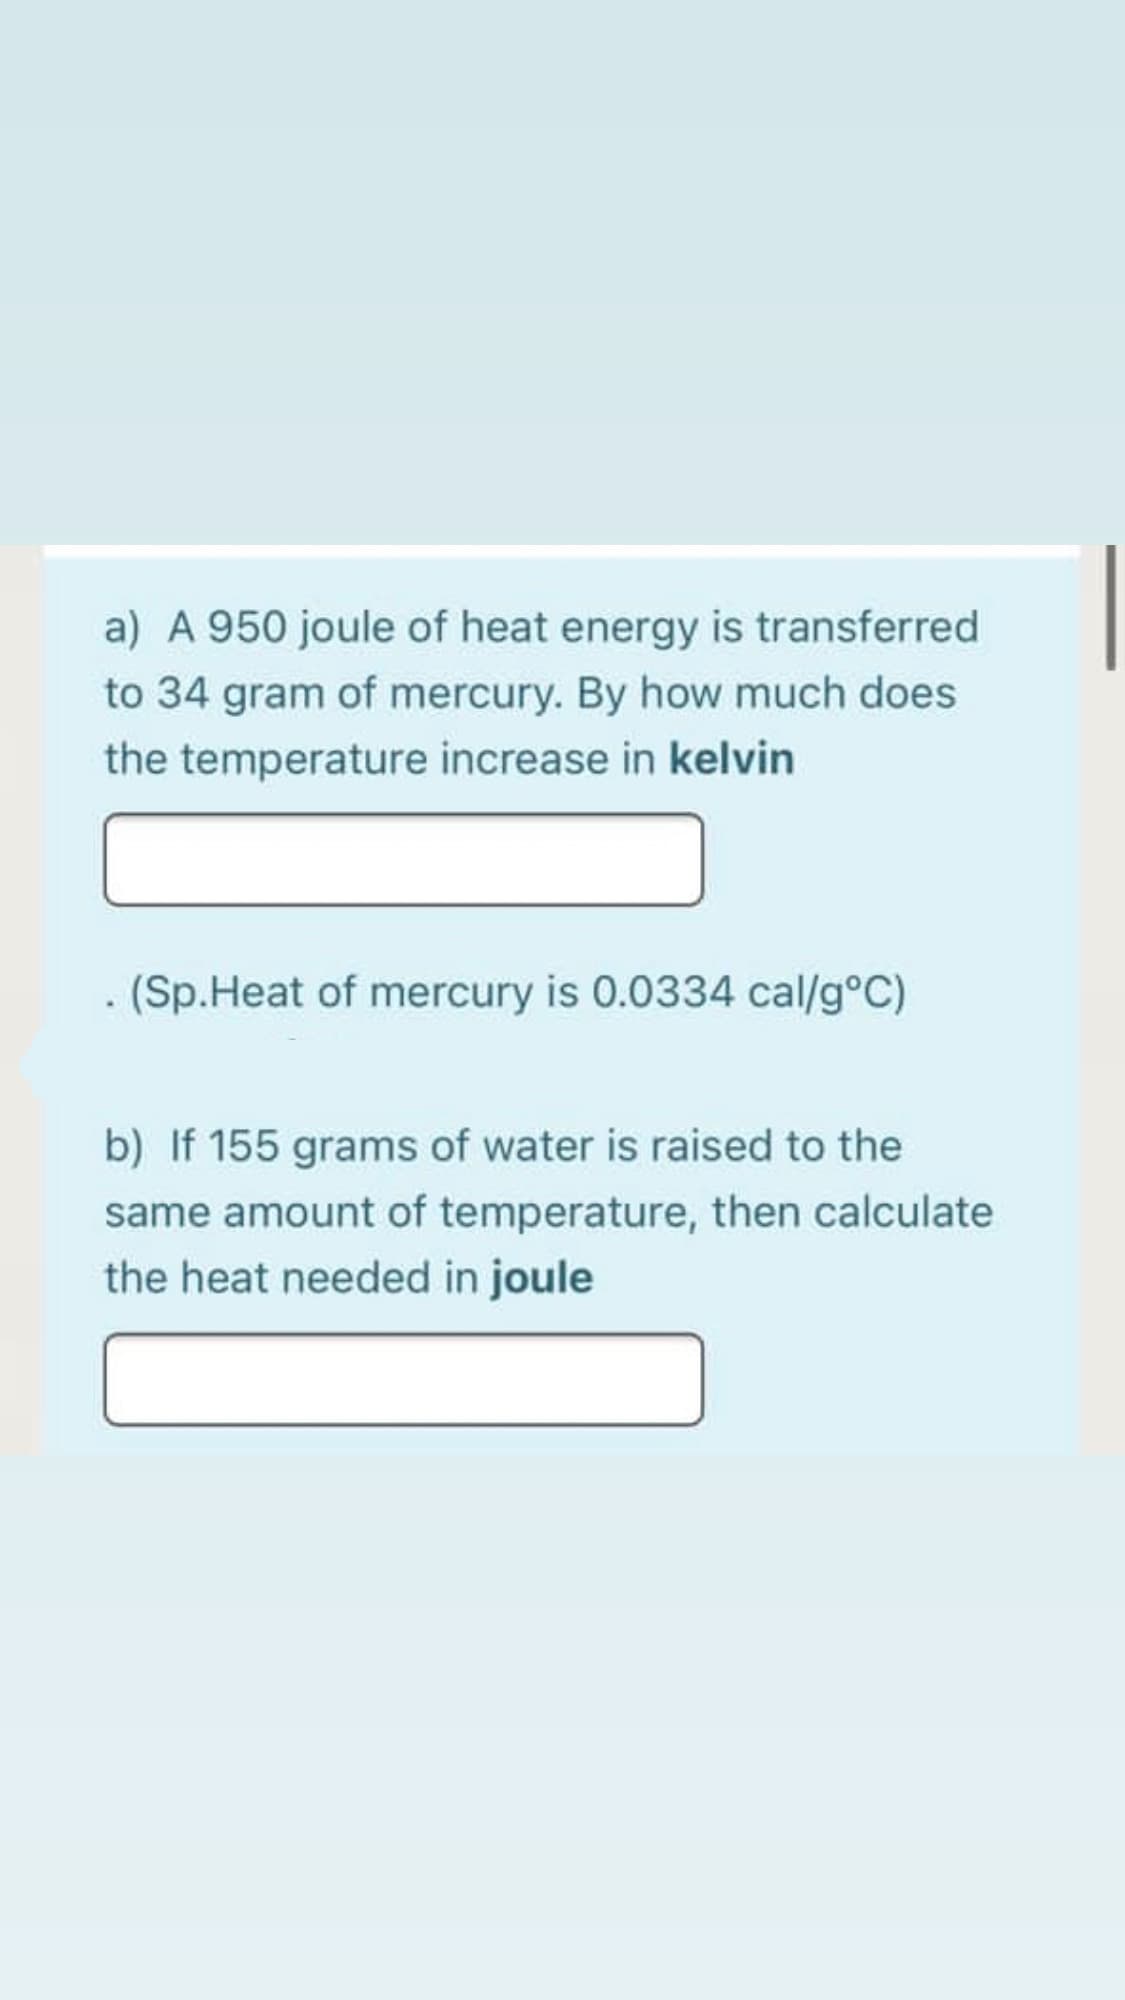 a) A 950 joule of heat energy is transferred
to 34 gram of mercury. By how much does
the temperature increase in kelvin
(Sp.Heat of mercury is 0.0334 cal/g°C)
b) If 155 grams of water is raised to the
same amount of temperature, then calculate
the heat needed in joule
